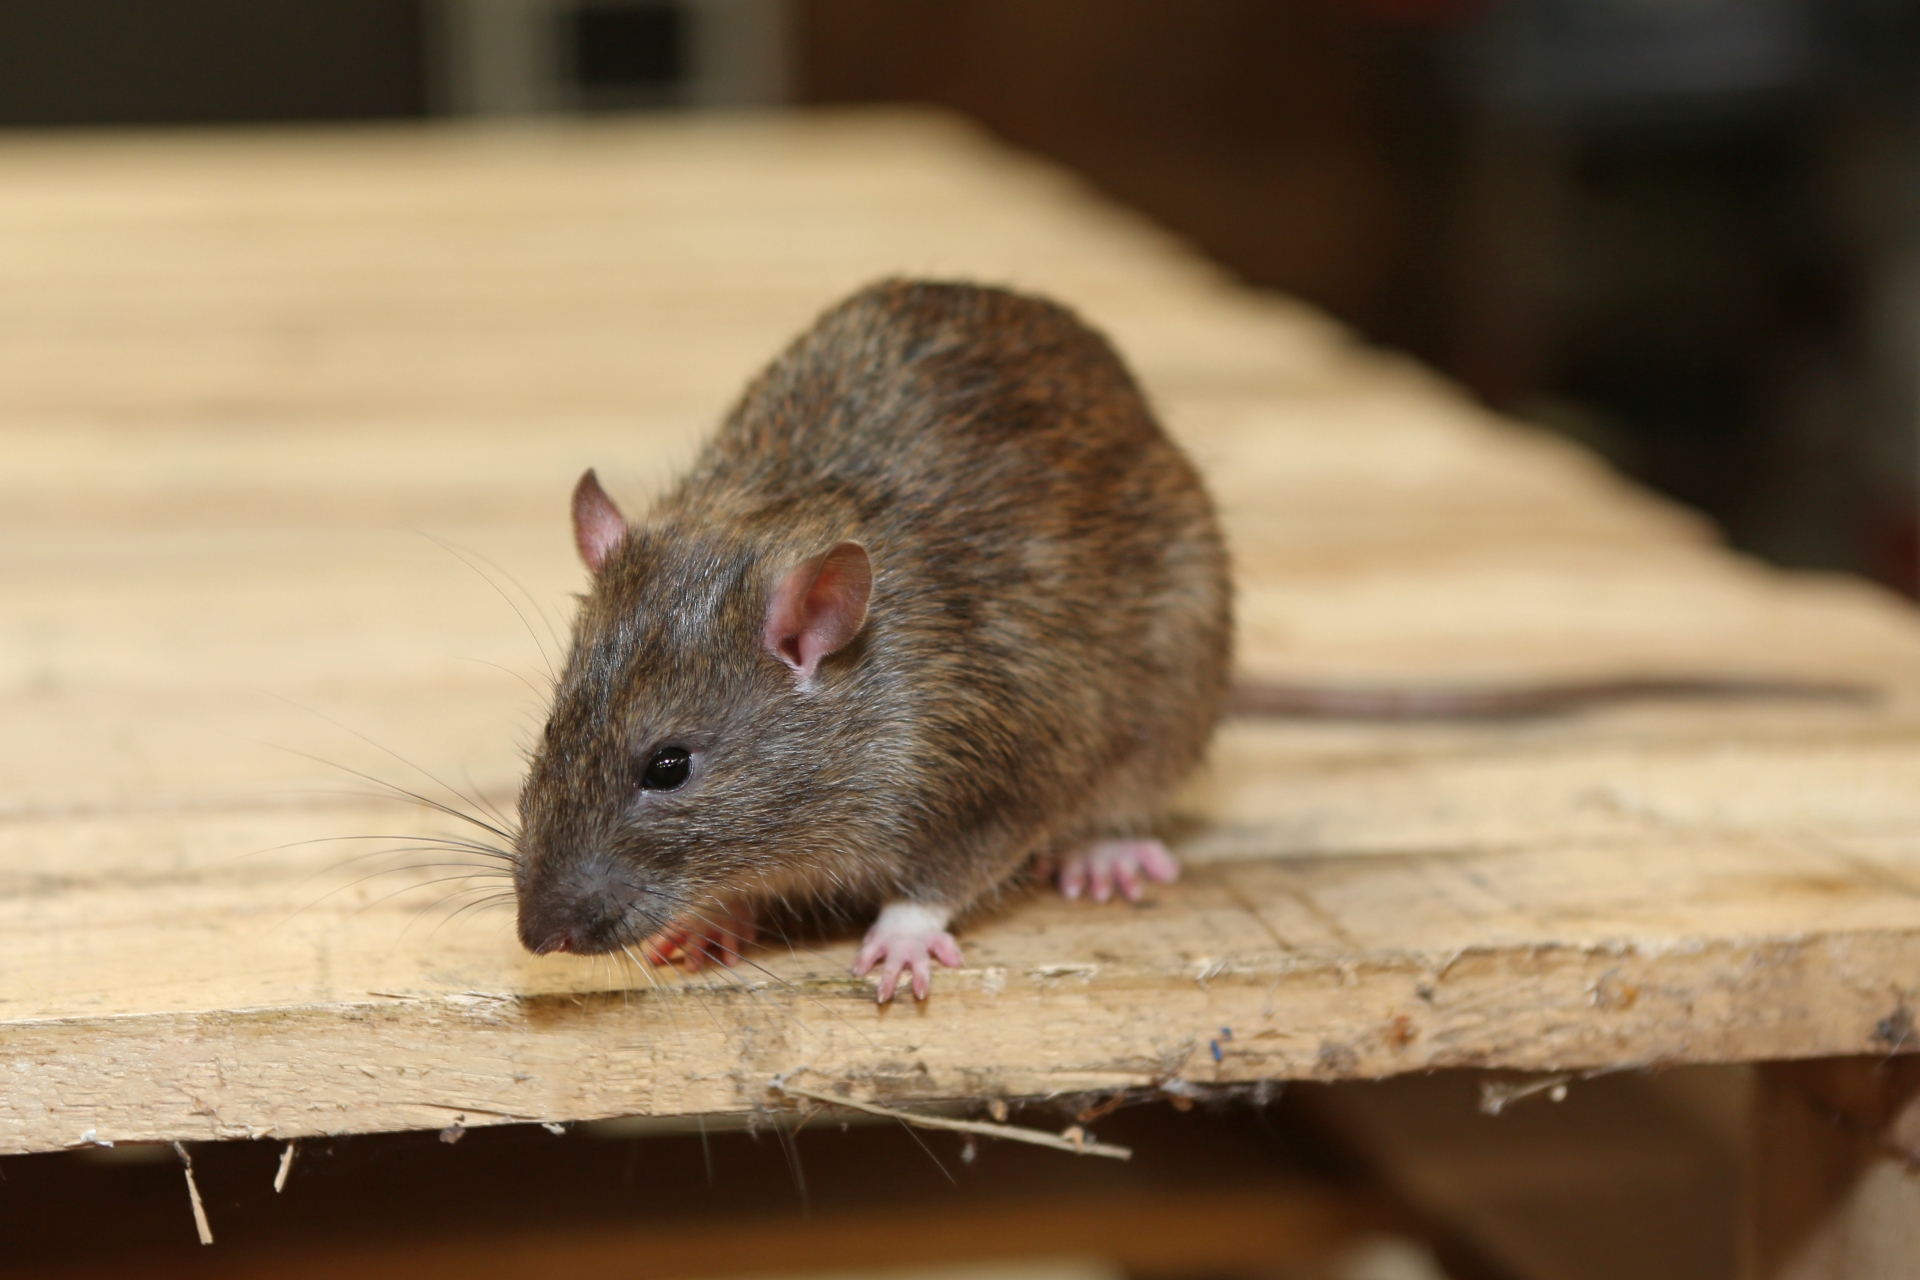 Rat Infestation, Pest Control in Chessington, Hook, KT9. Call Now 020 8166 9746